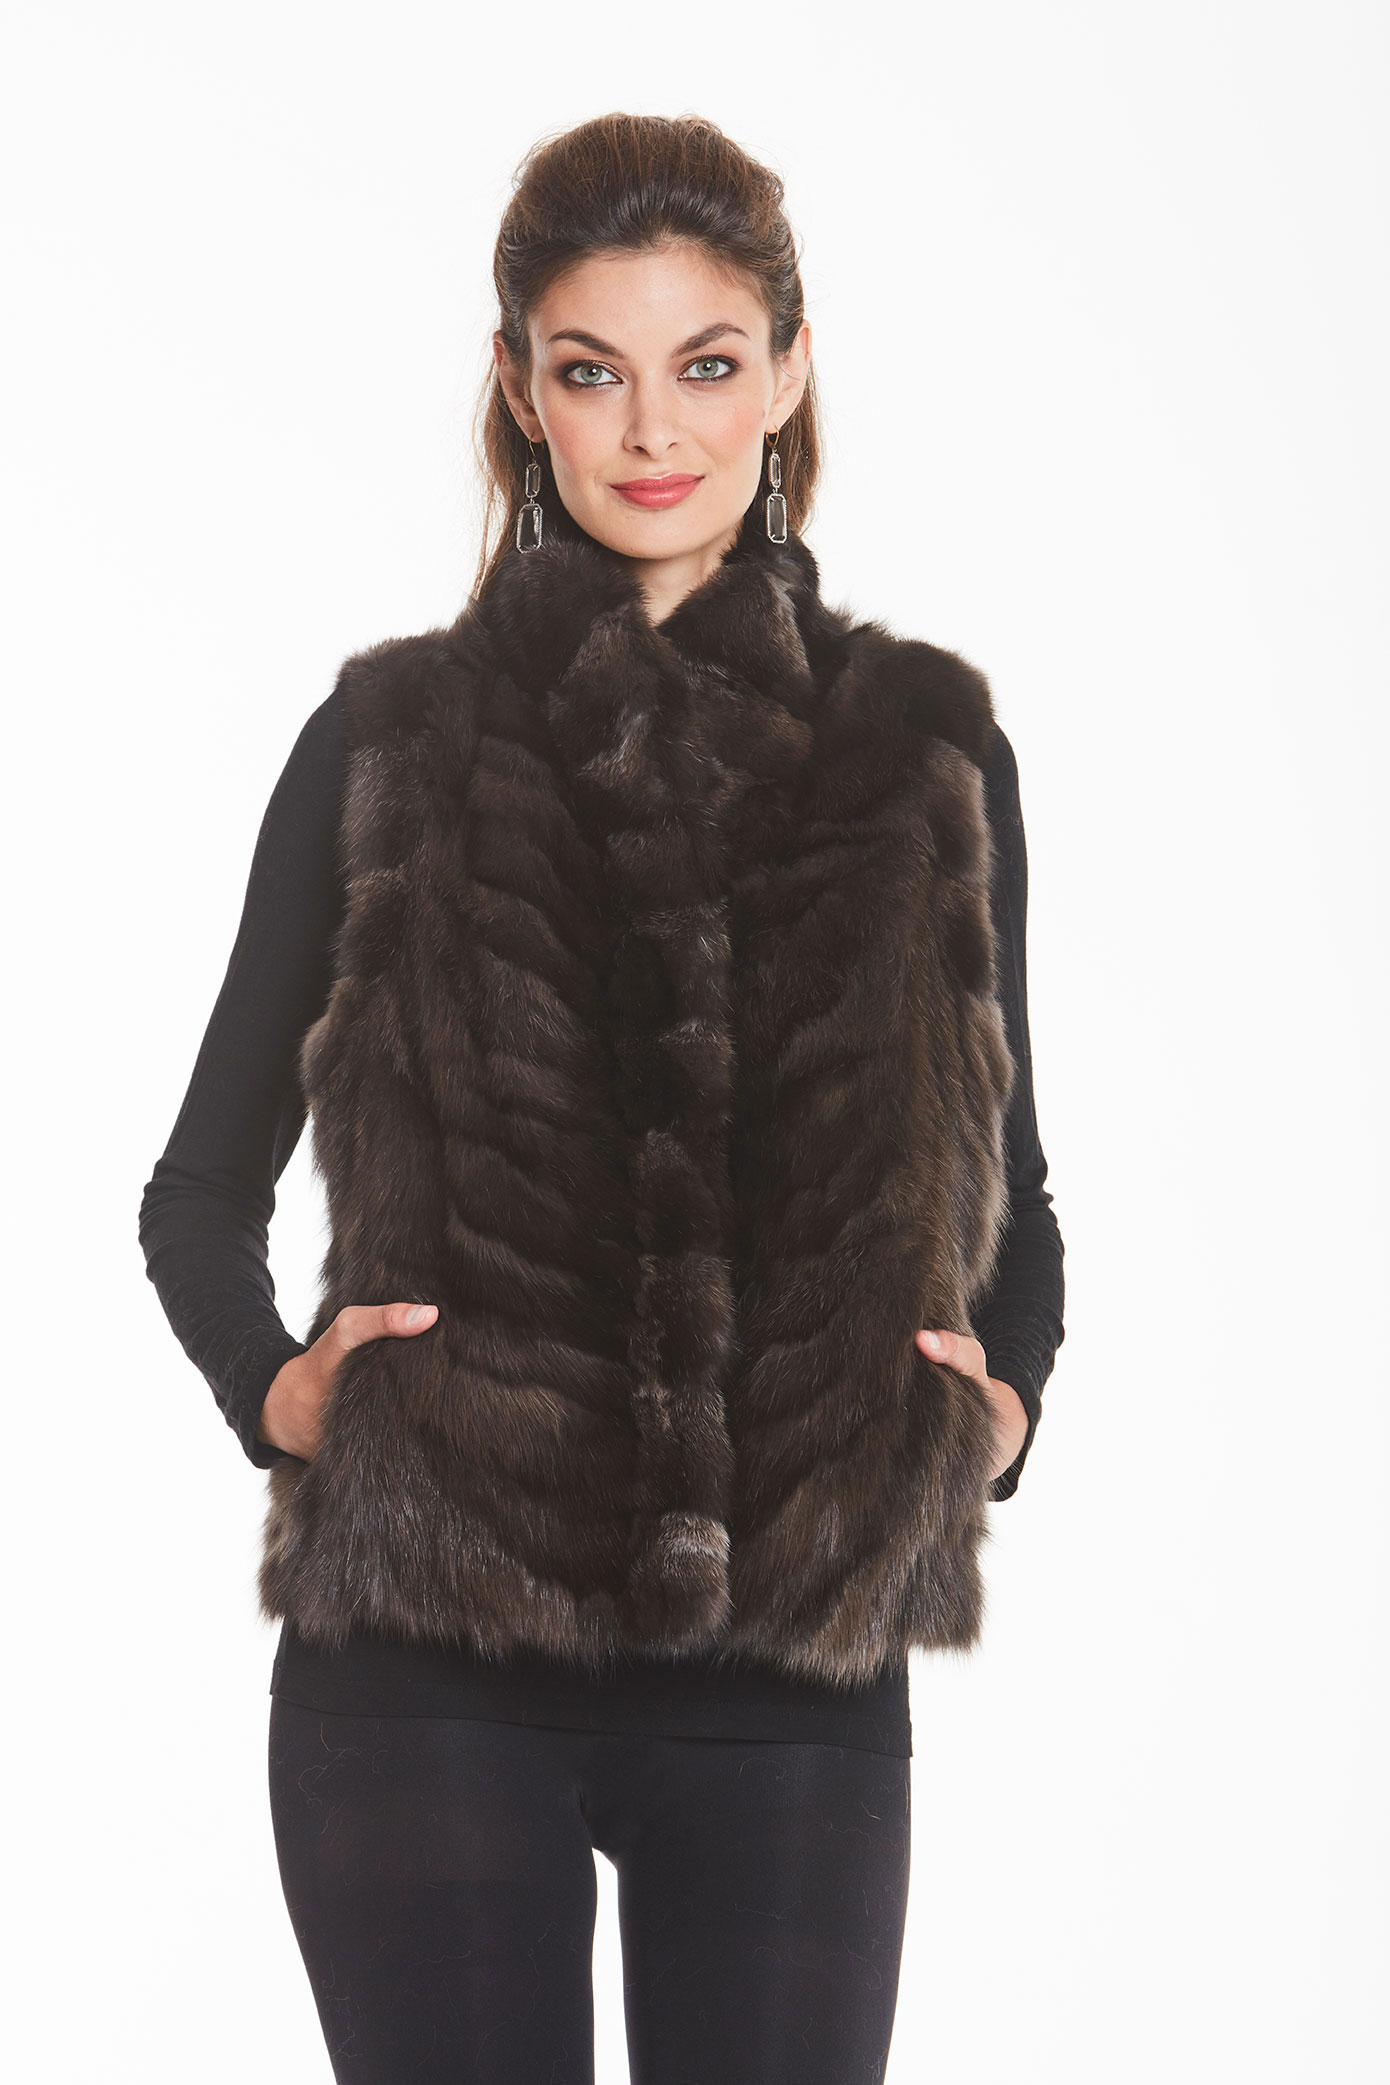 Siberian Sable Vest – Reversible to Fabric – Madison Avenue Mall Furs